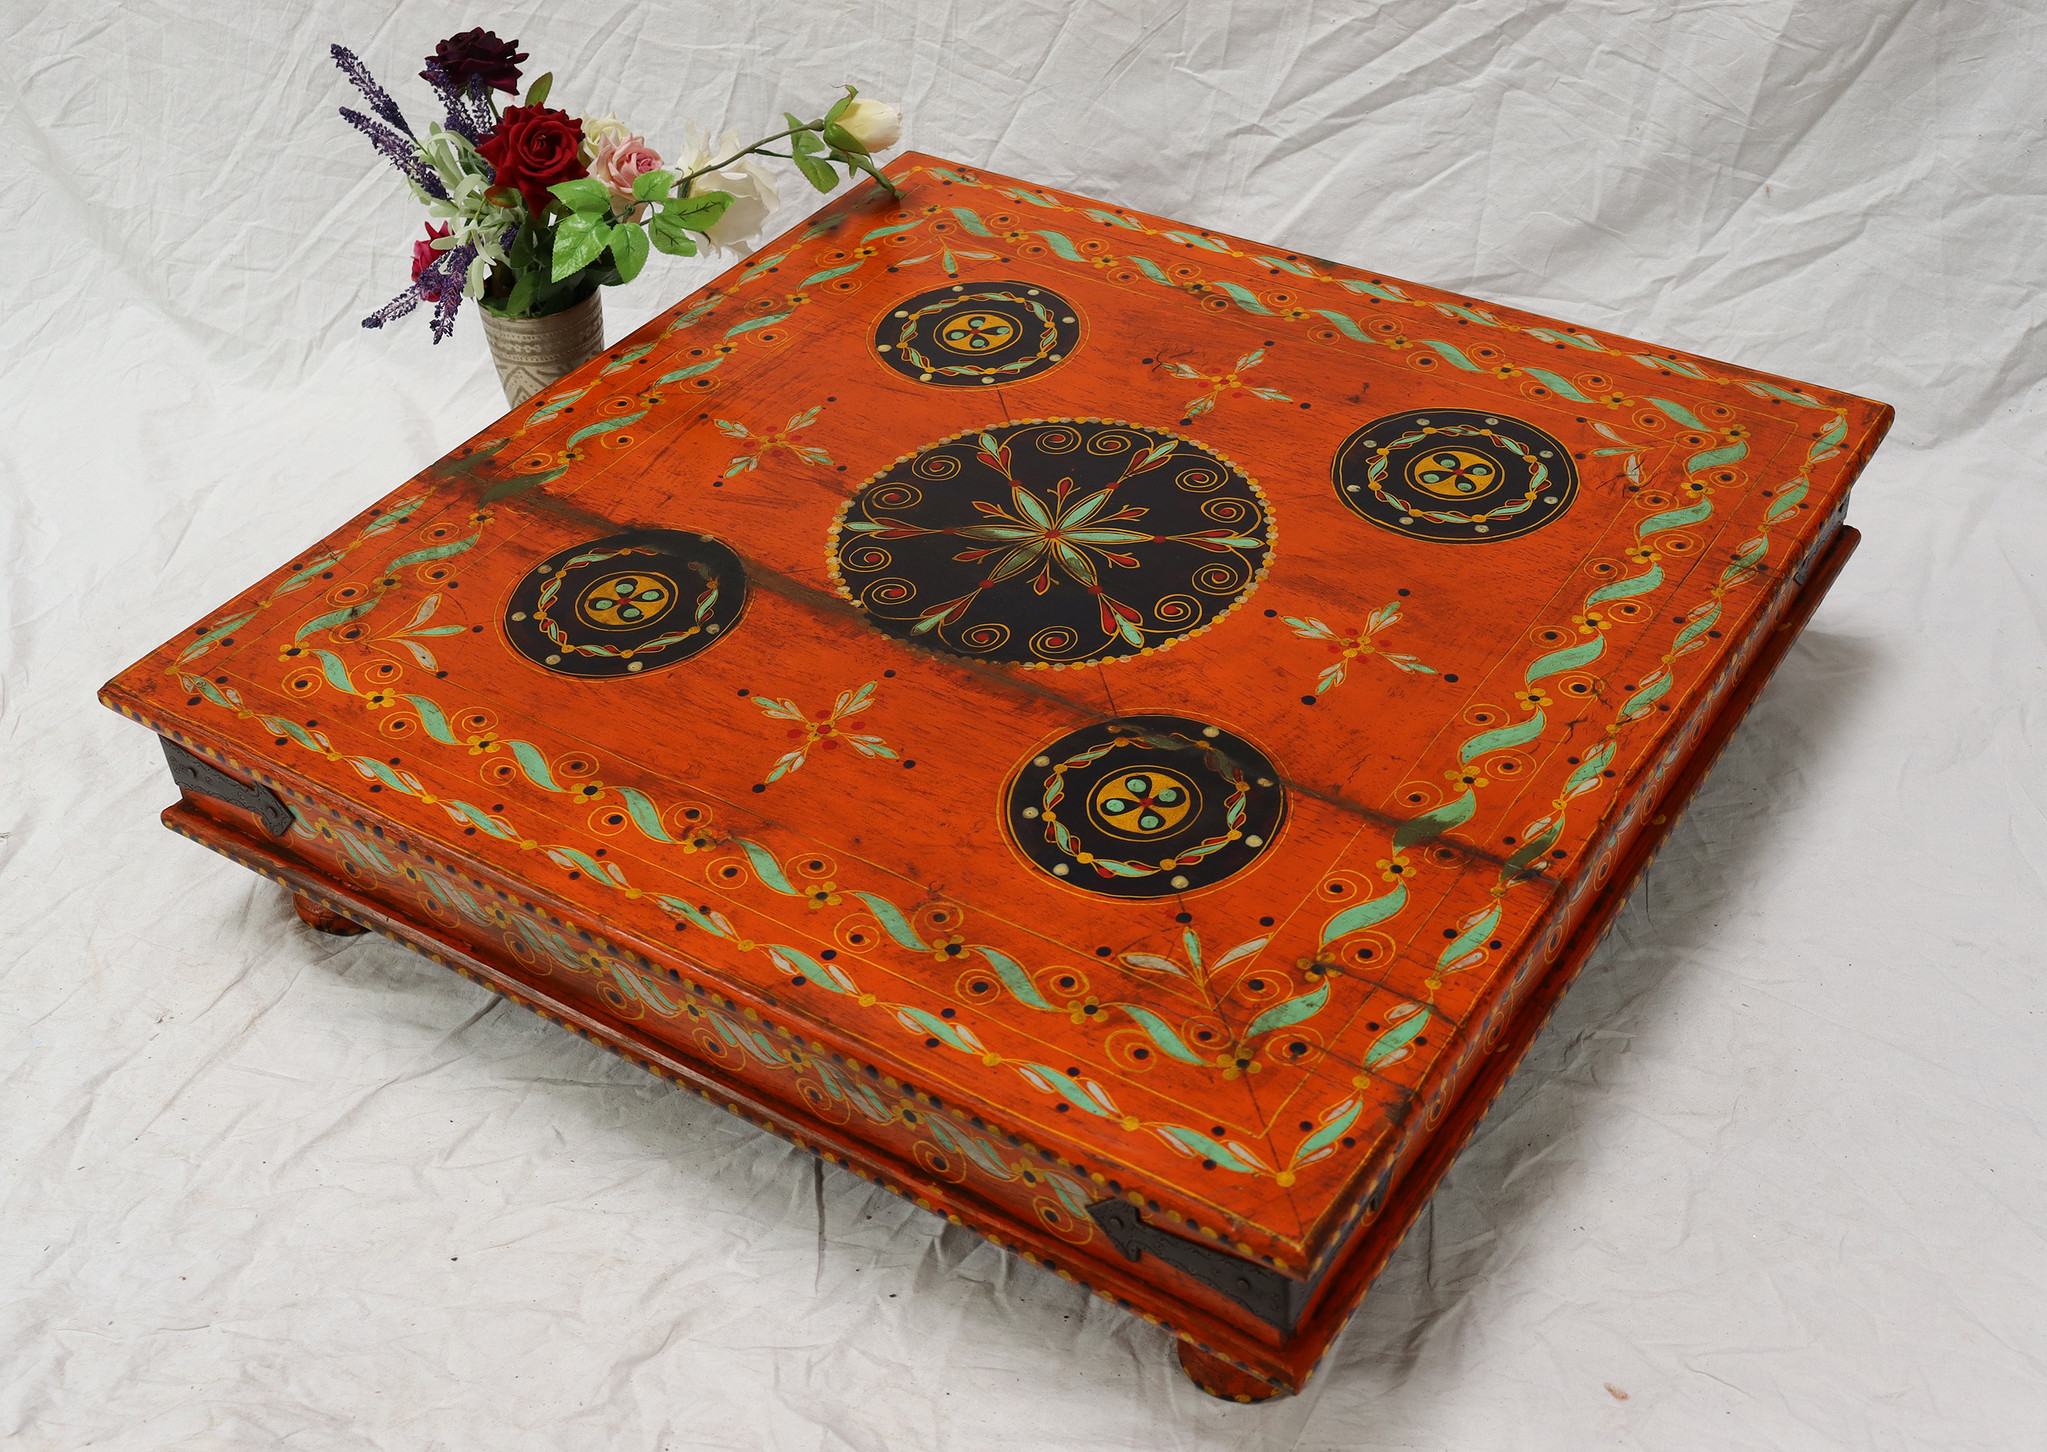 80x80 cm orient vintage hand painted  low tea table Coffee side Table from Afghanistan 22/F